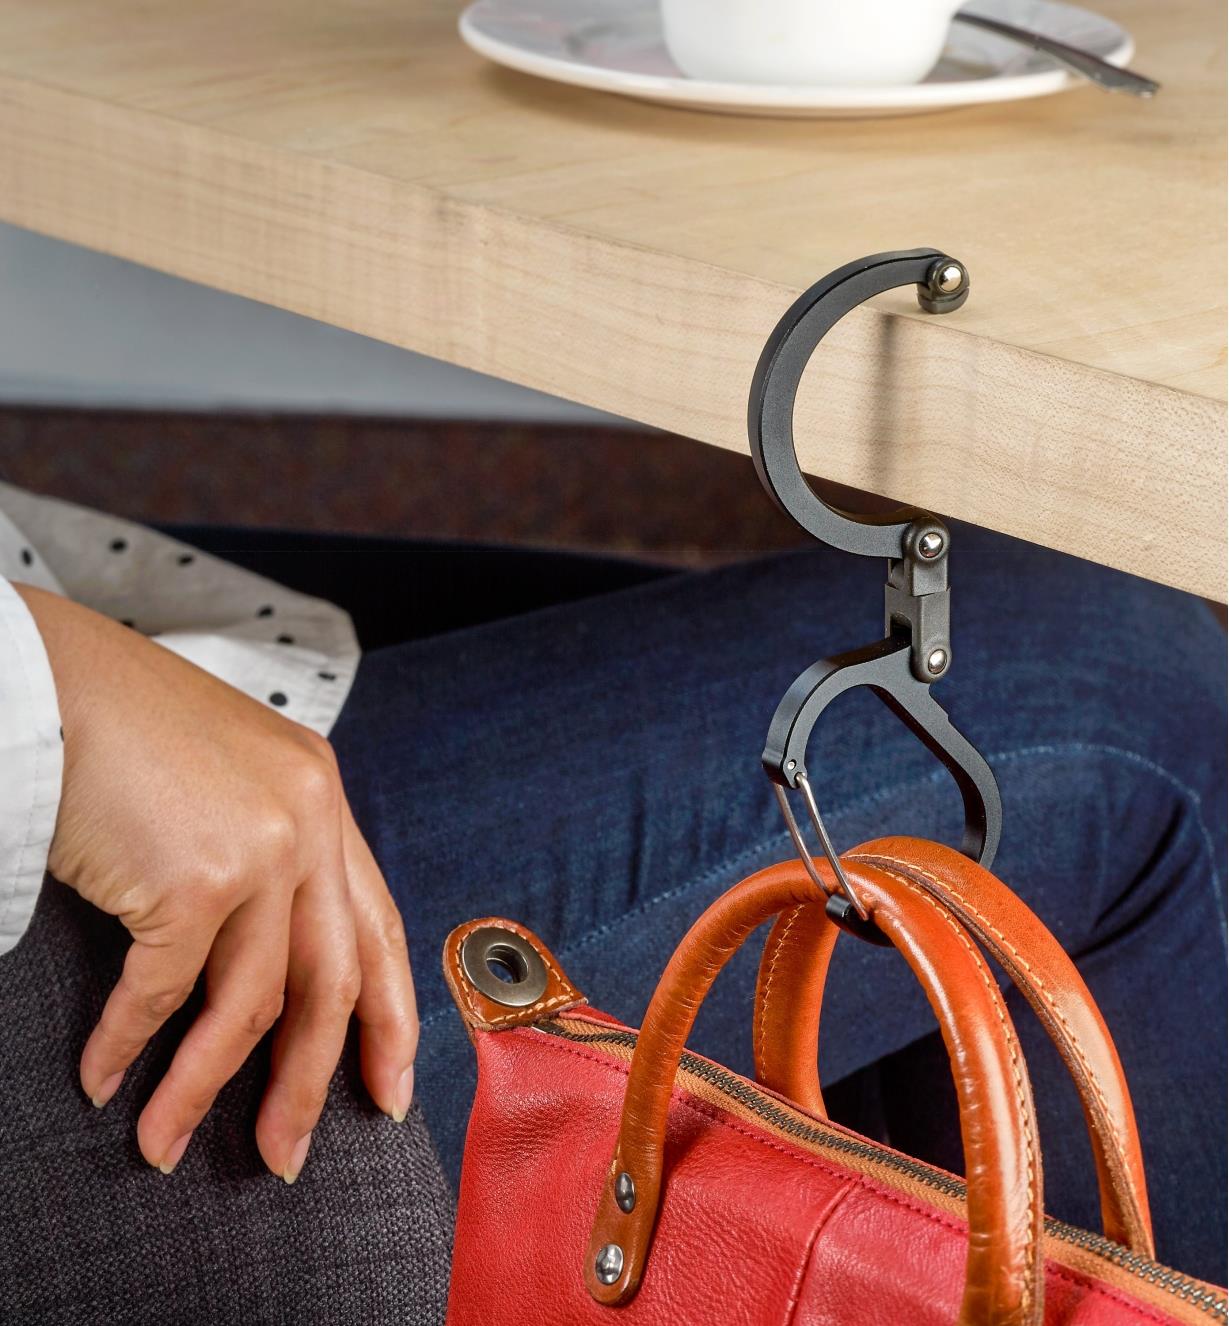 A Heroclip carabiner used to hang a purse on the edge of a table in a restaurant